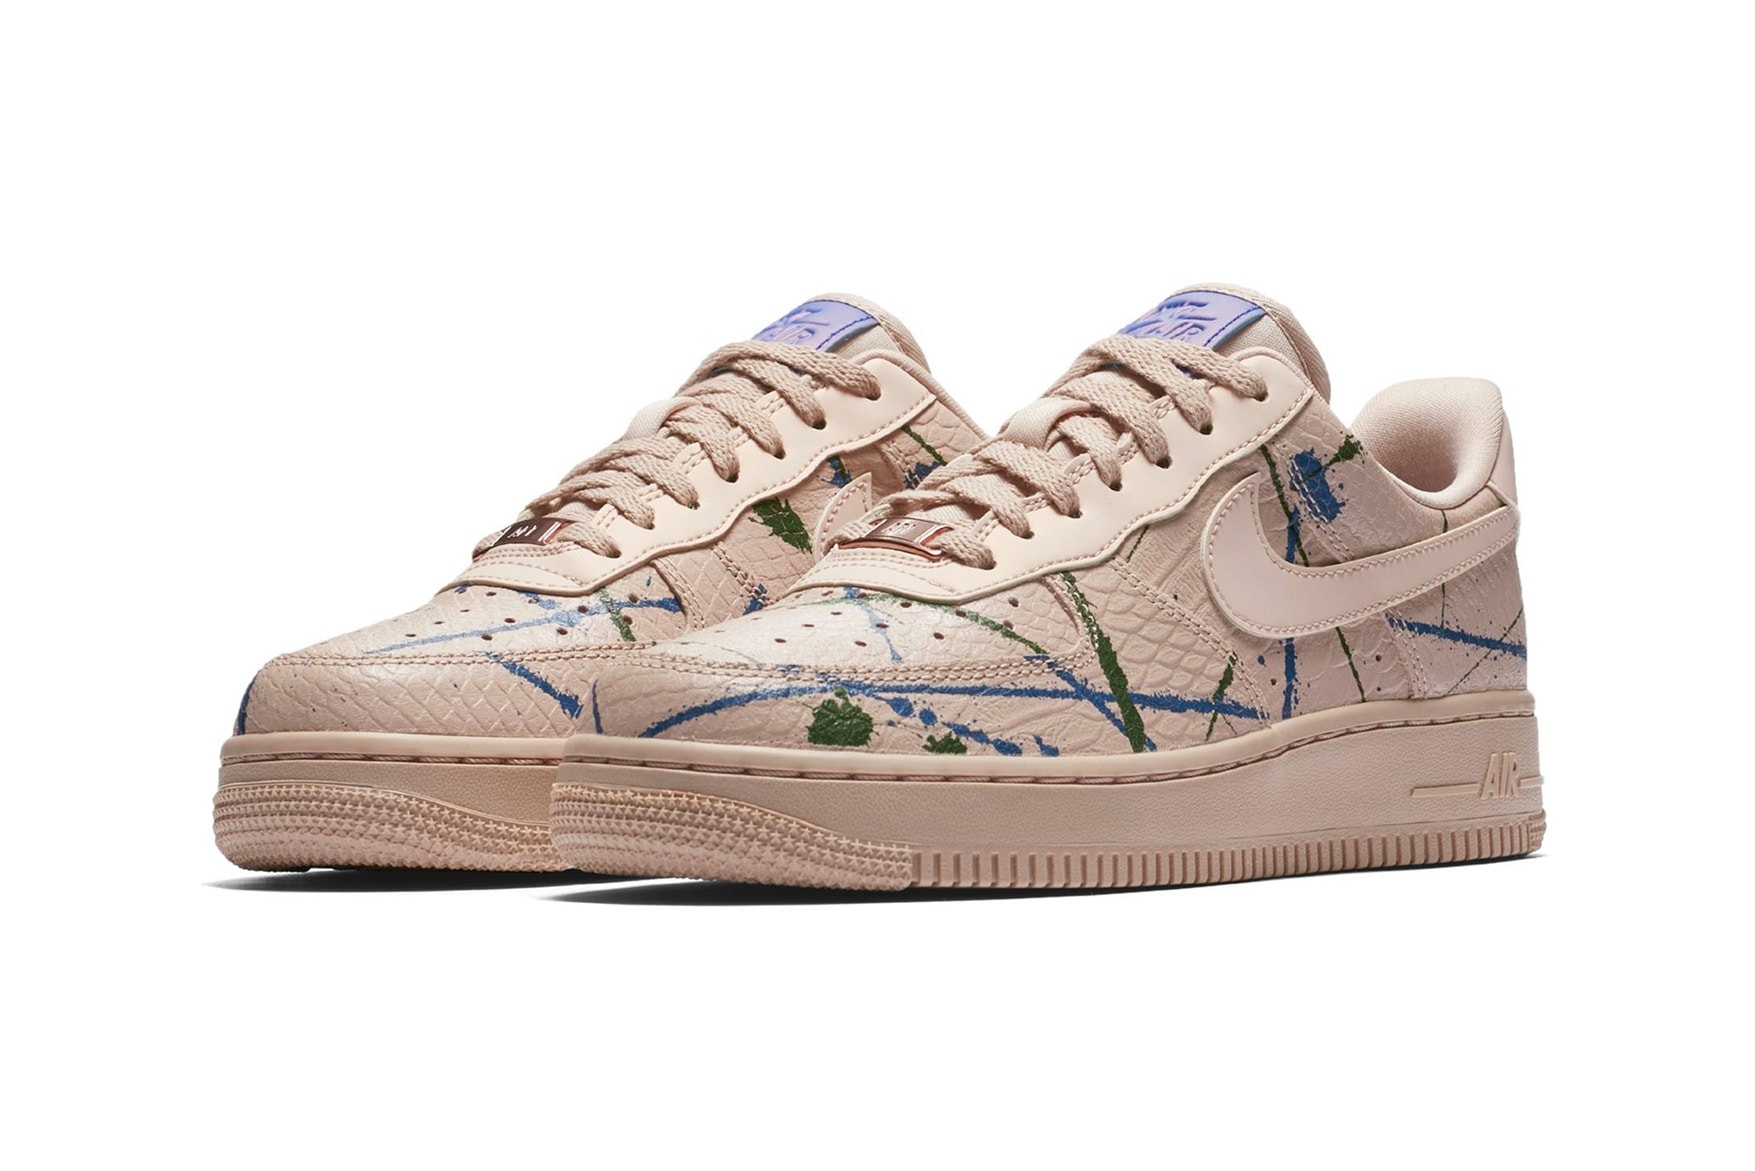 Nike "Particle Beige" Sneaker Capsule Collection Nike Air Force 1 Air More Money Foamposite Shoes Basketball